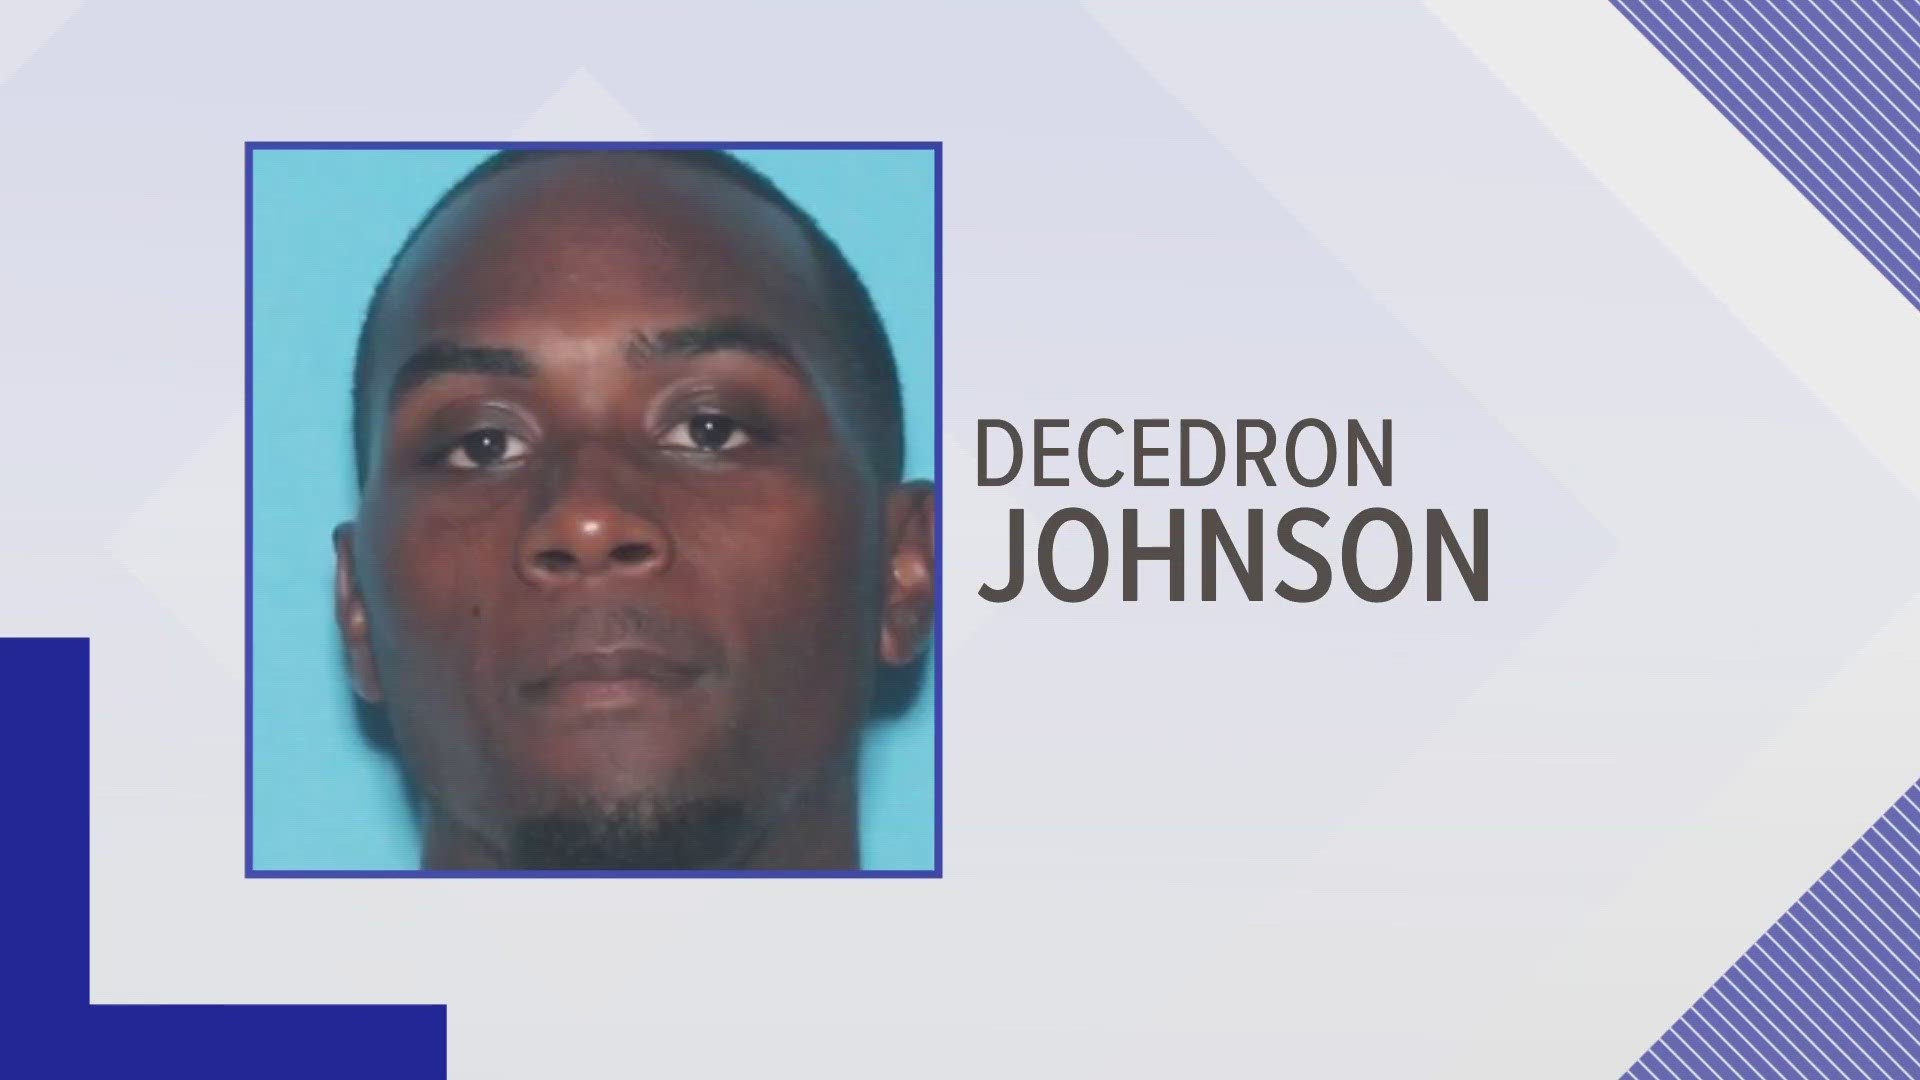 Horn Lake Police said Decedron Johnson, who they said is the suspect of a deadly shooting Thursday afternoon, was arrested in Coahoma County, Mississippi.